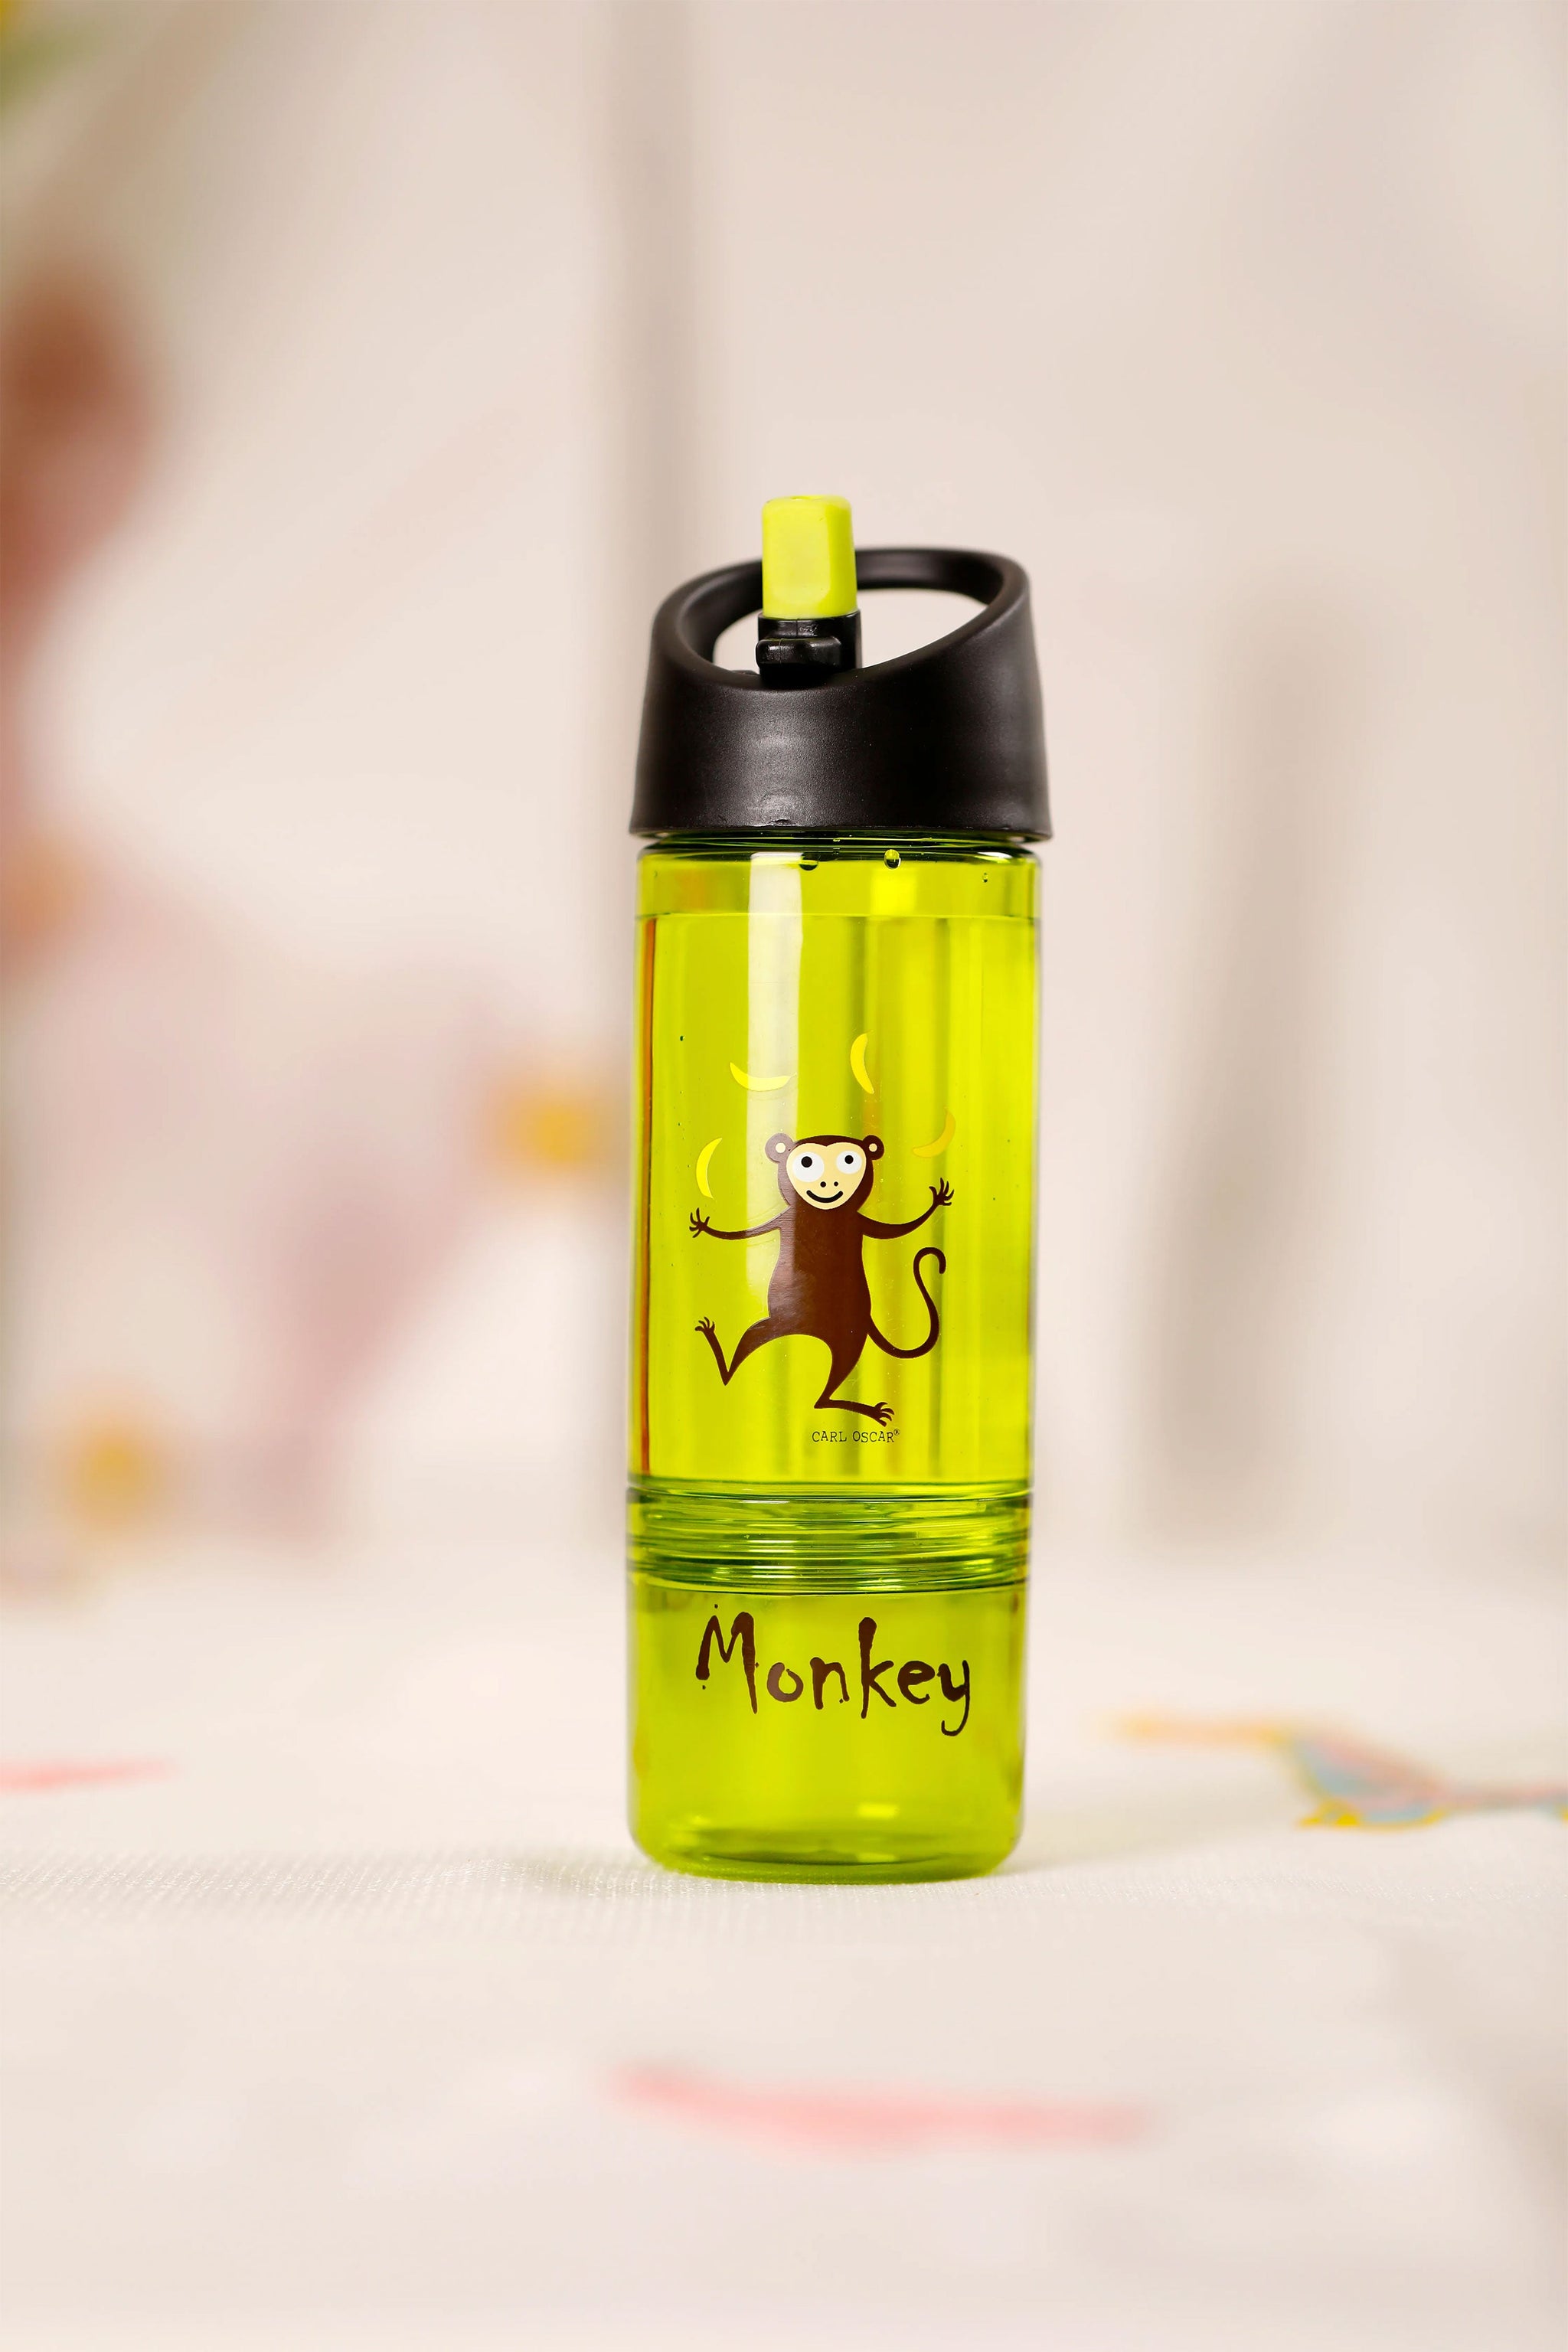 Water Bottle and snack box 2 in 1 Monkey Lime - Carl Oscar